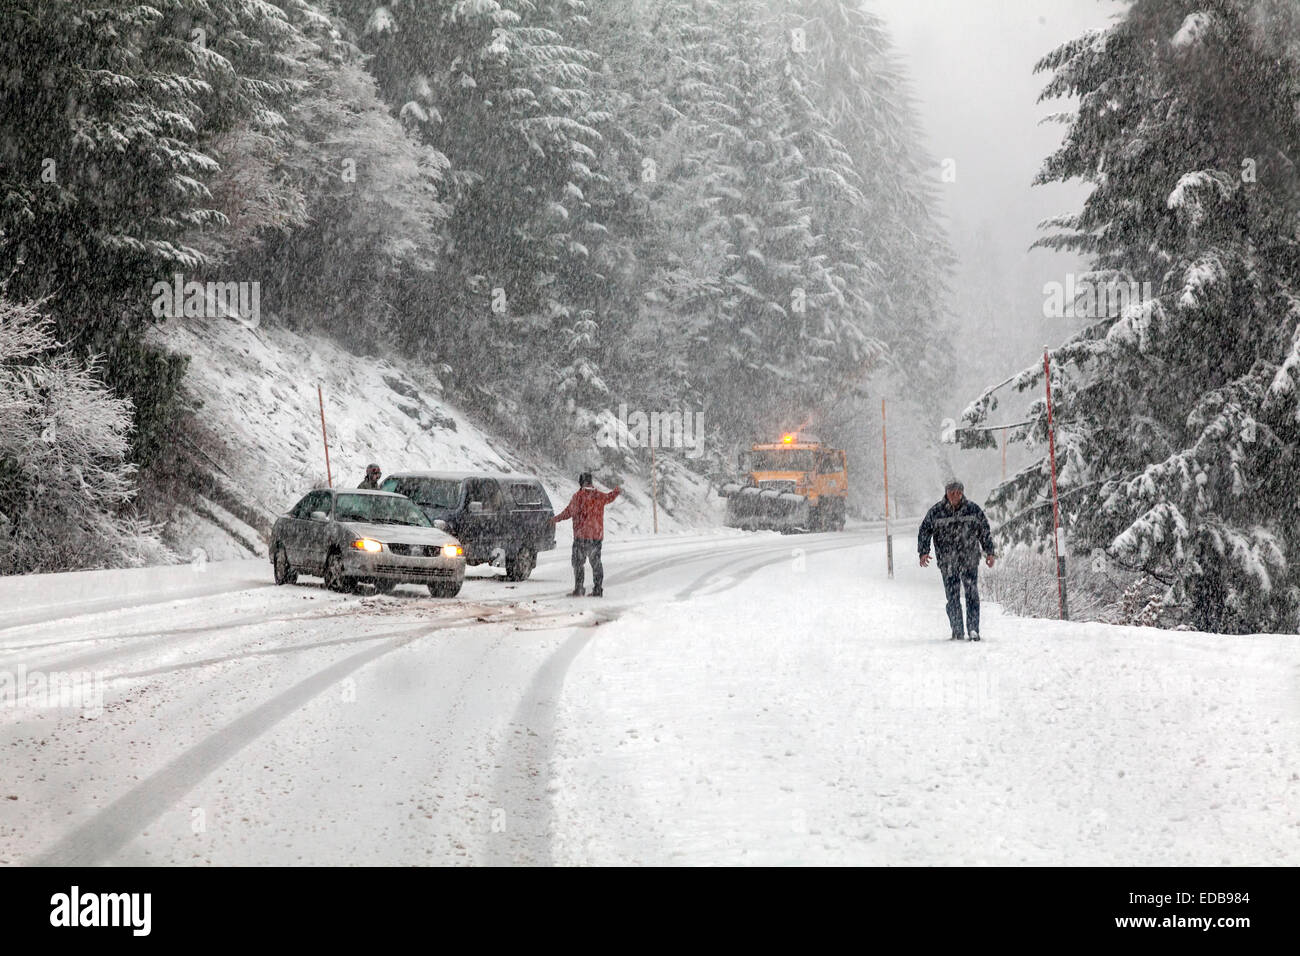 Two vehicles without chains spun out on snowy road during snowstorm while snow plow approaches on Tombstone Pass, Oregon, USA. Stock Photo